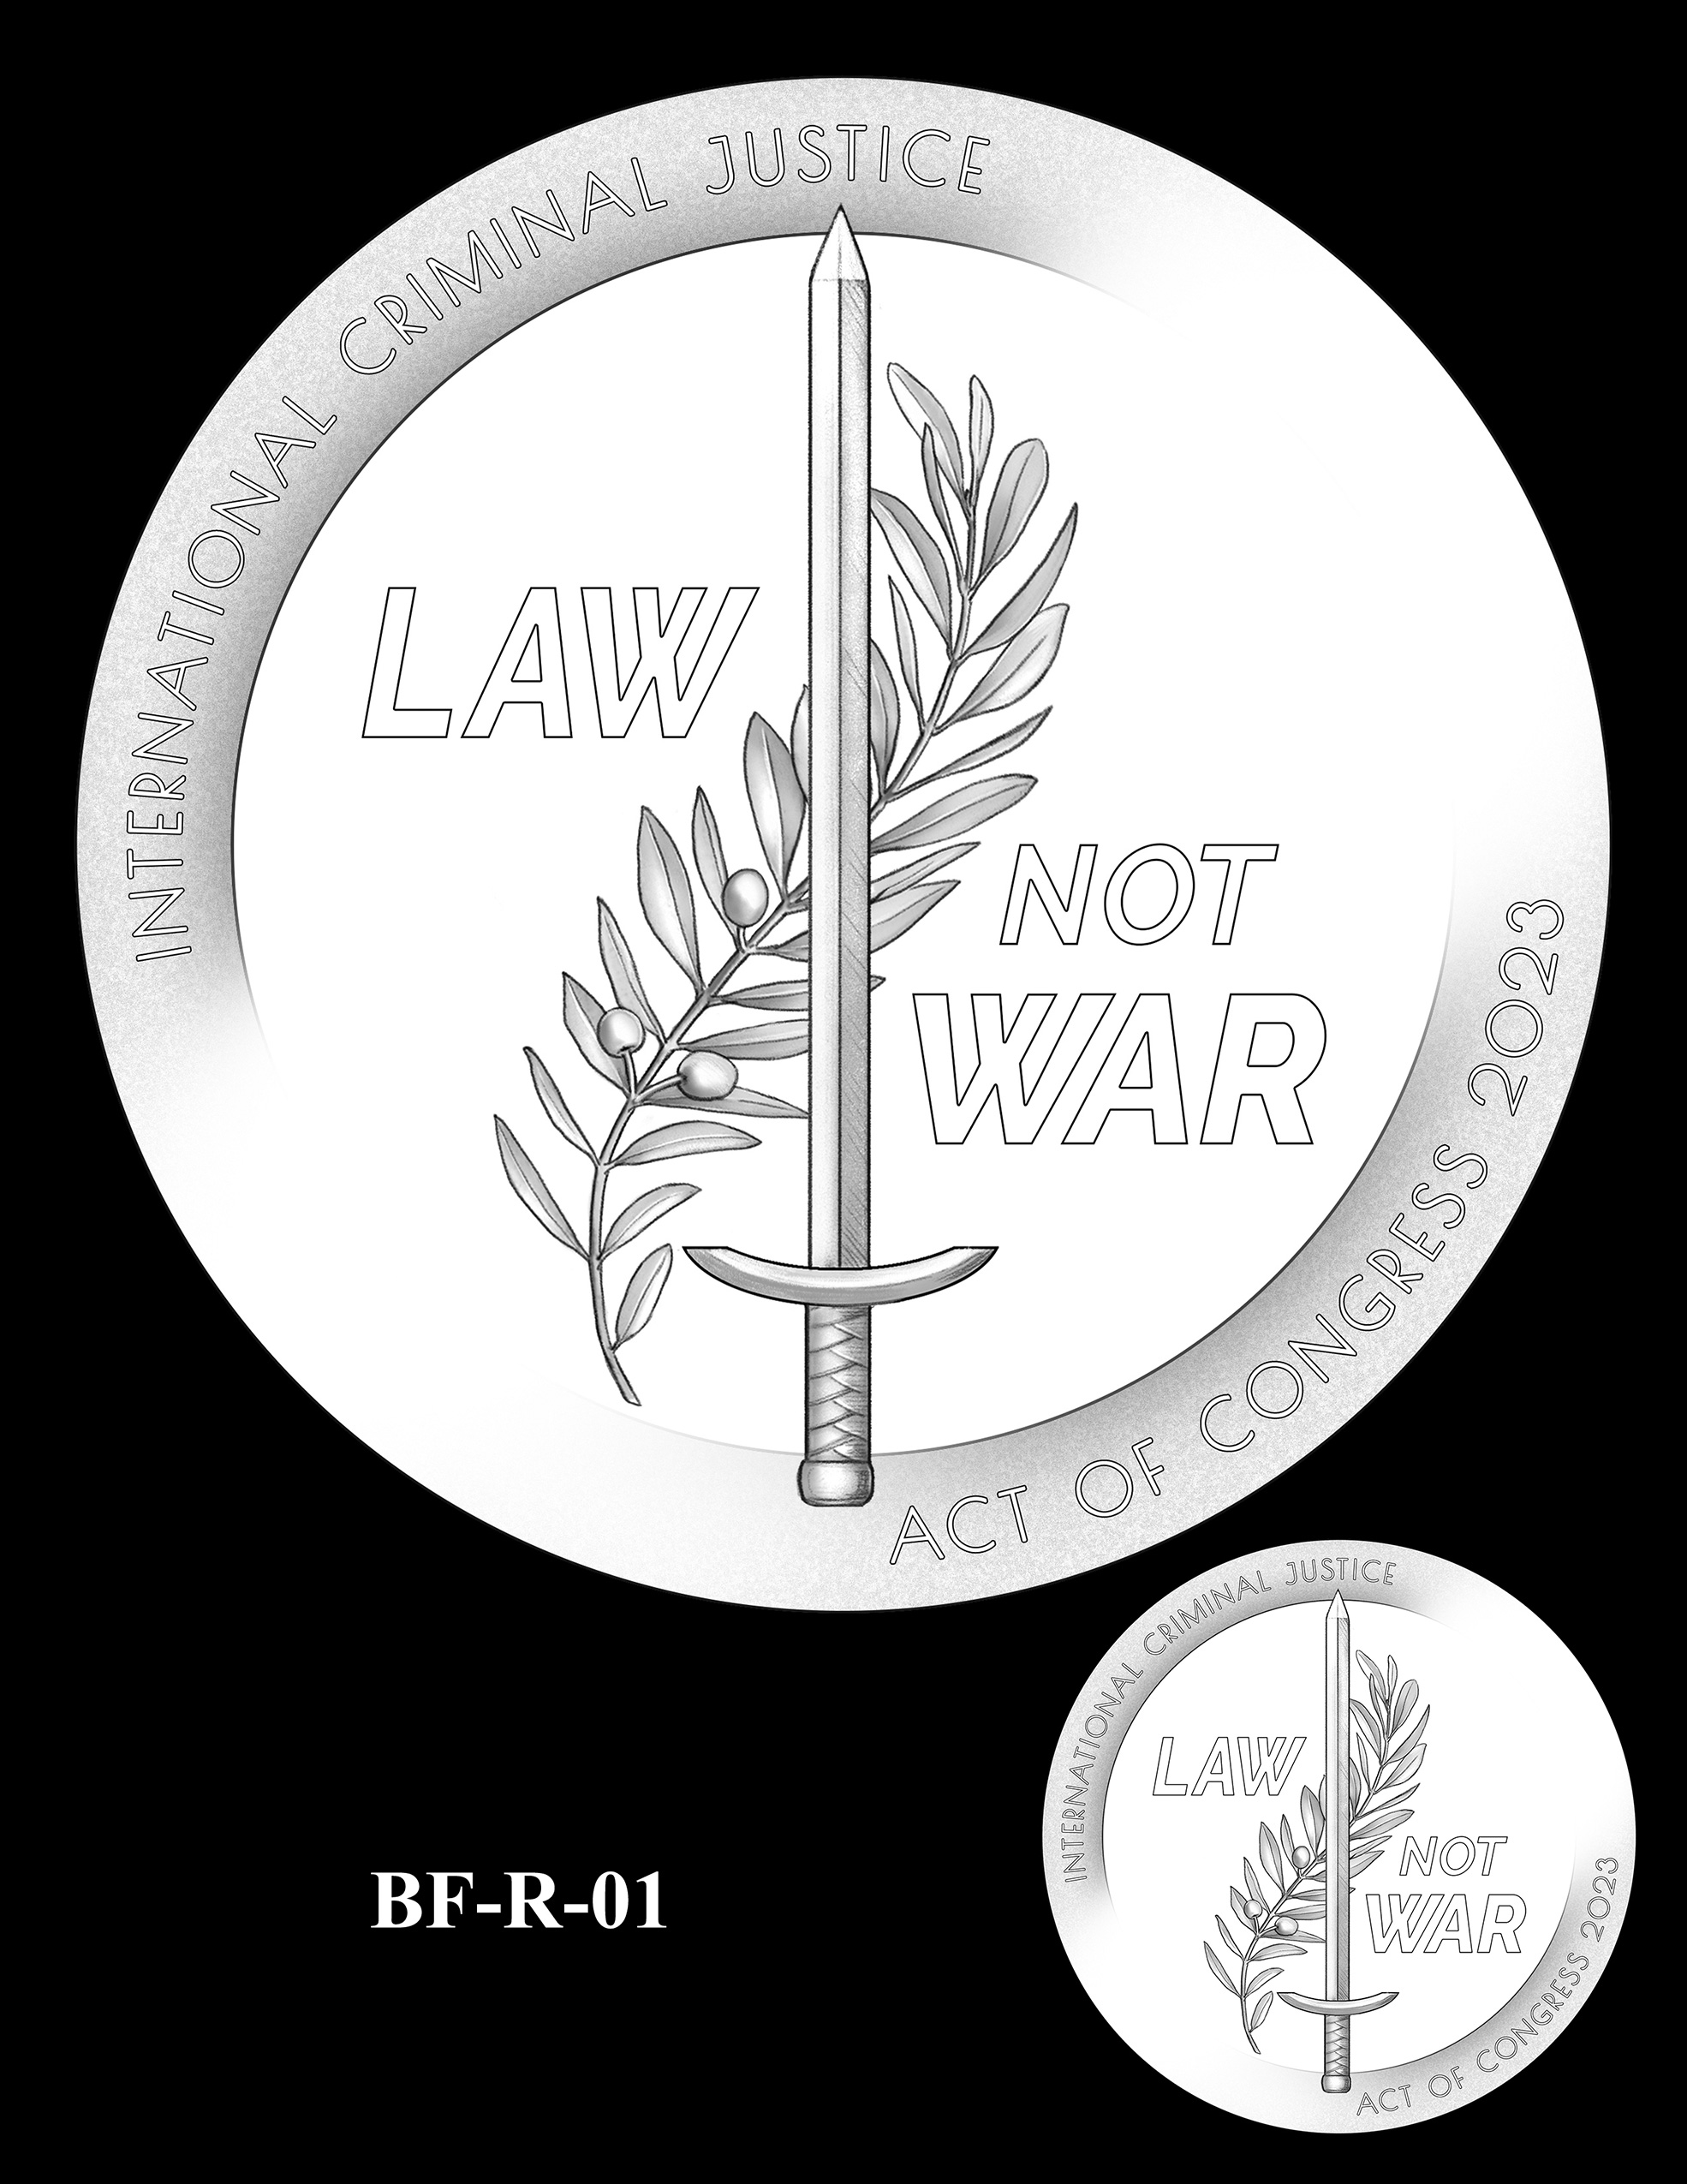 BF-R-01 -- Benjamin Ferencz Congressional Gold Medal